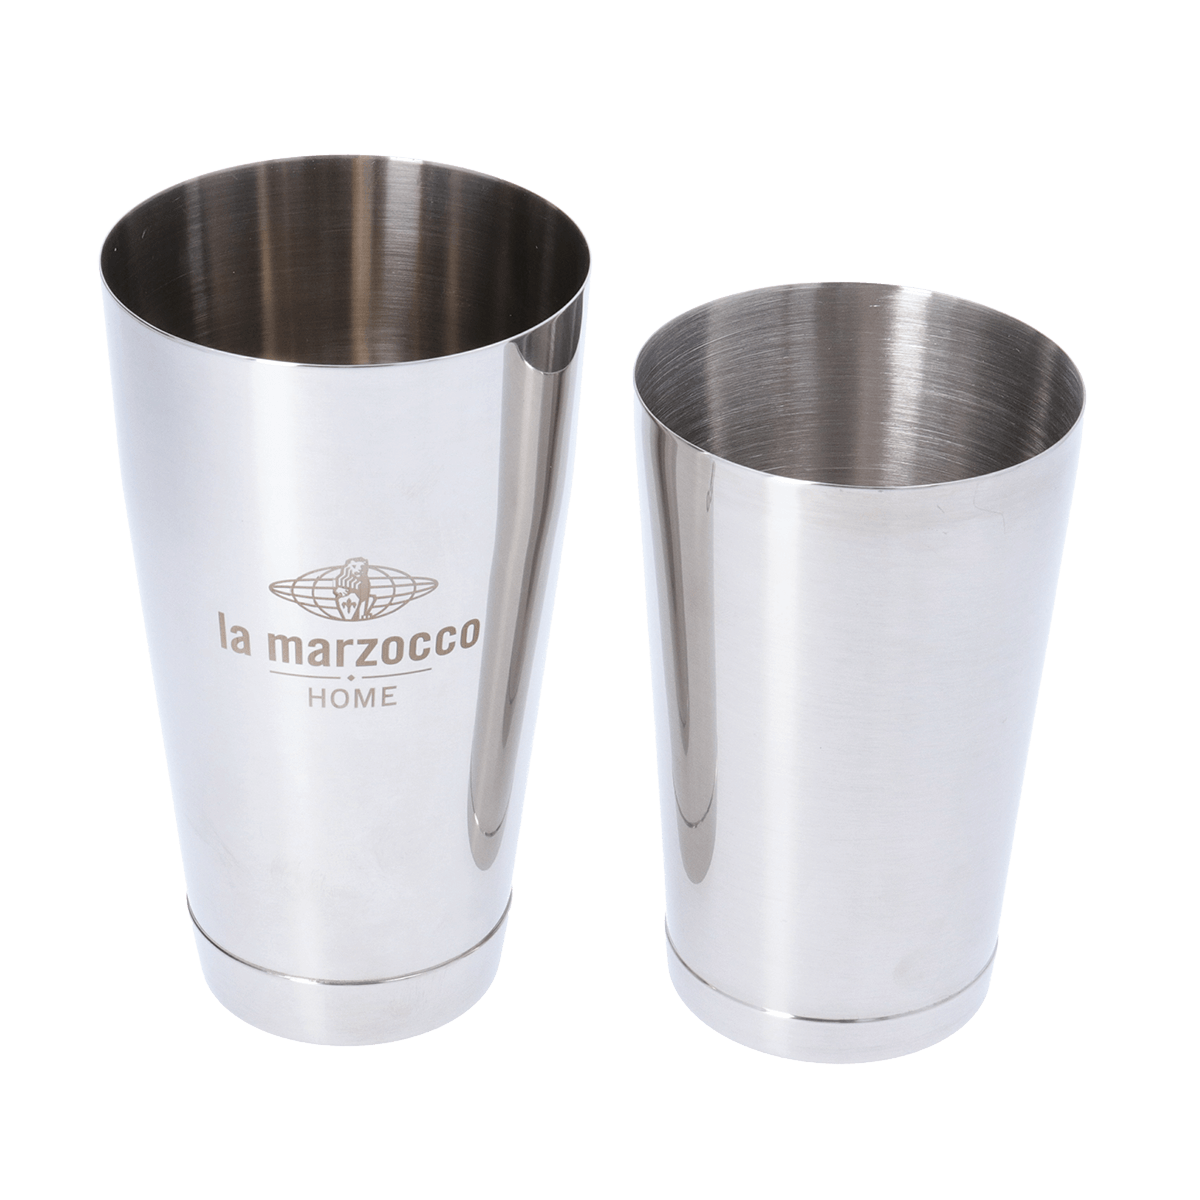 Barista Cocktail and Coffee Shaker (350ml/12oz)